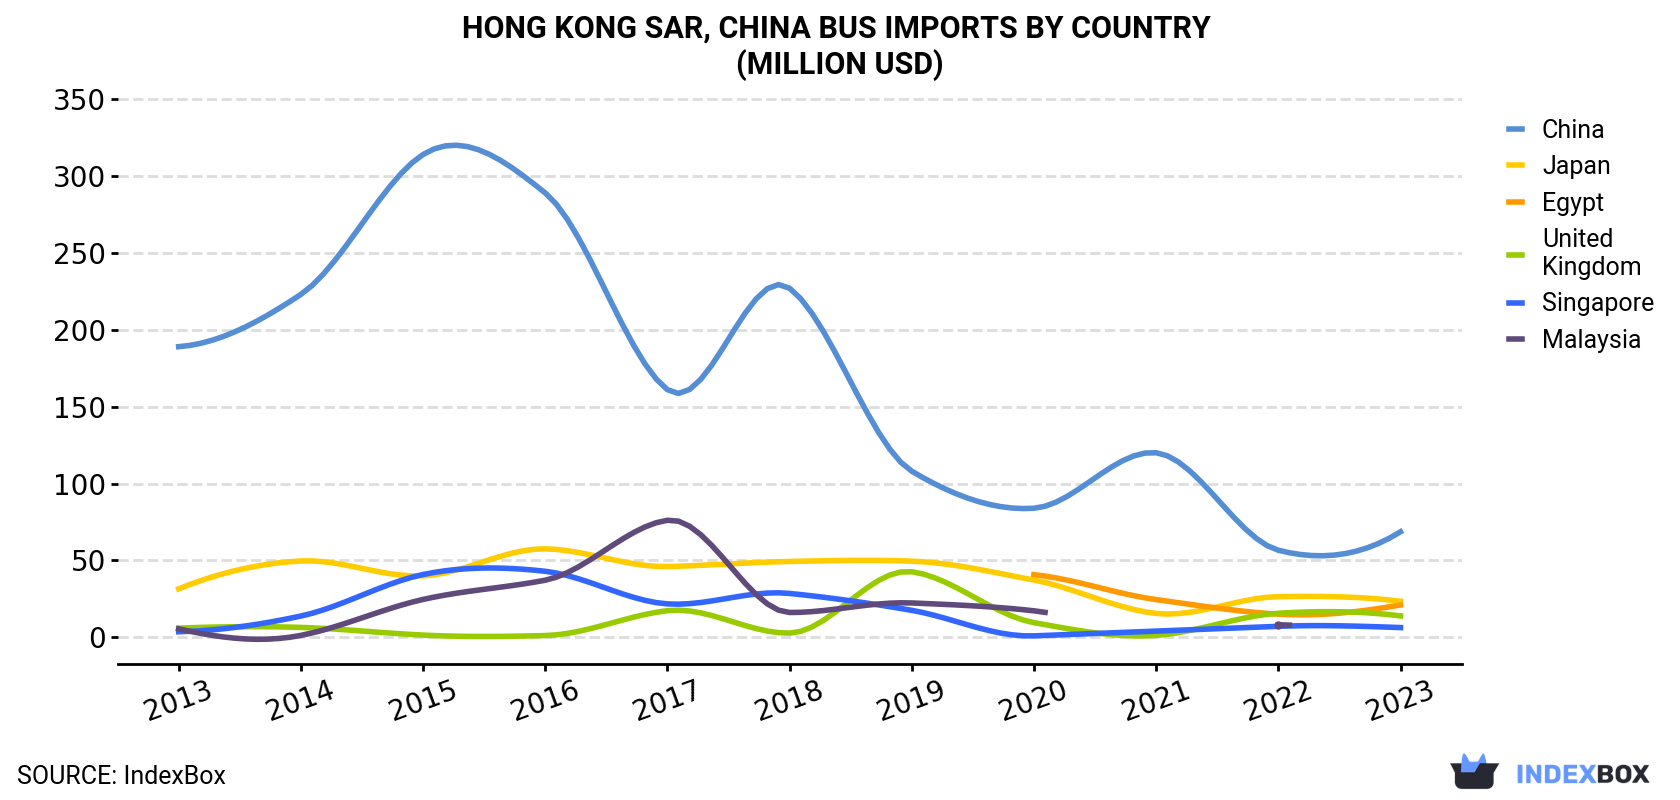 Hong Kong Bus Imports By Country (Million USD)